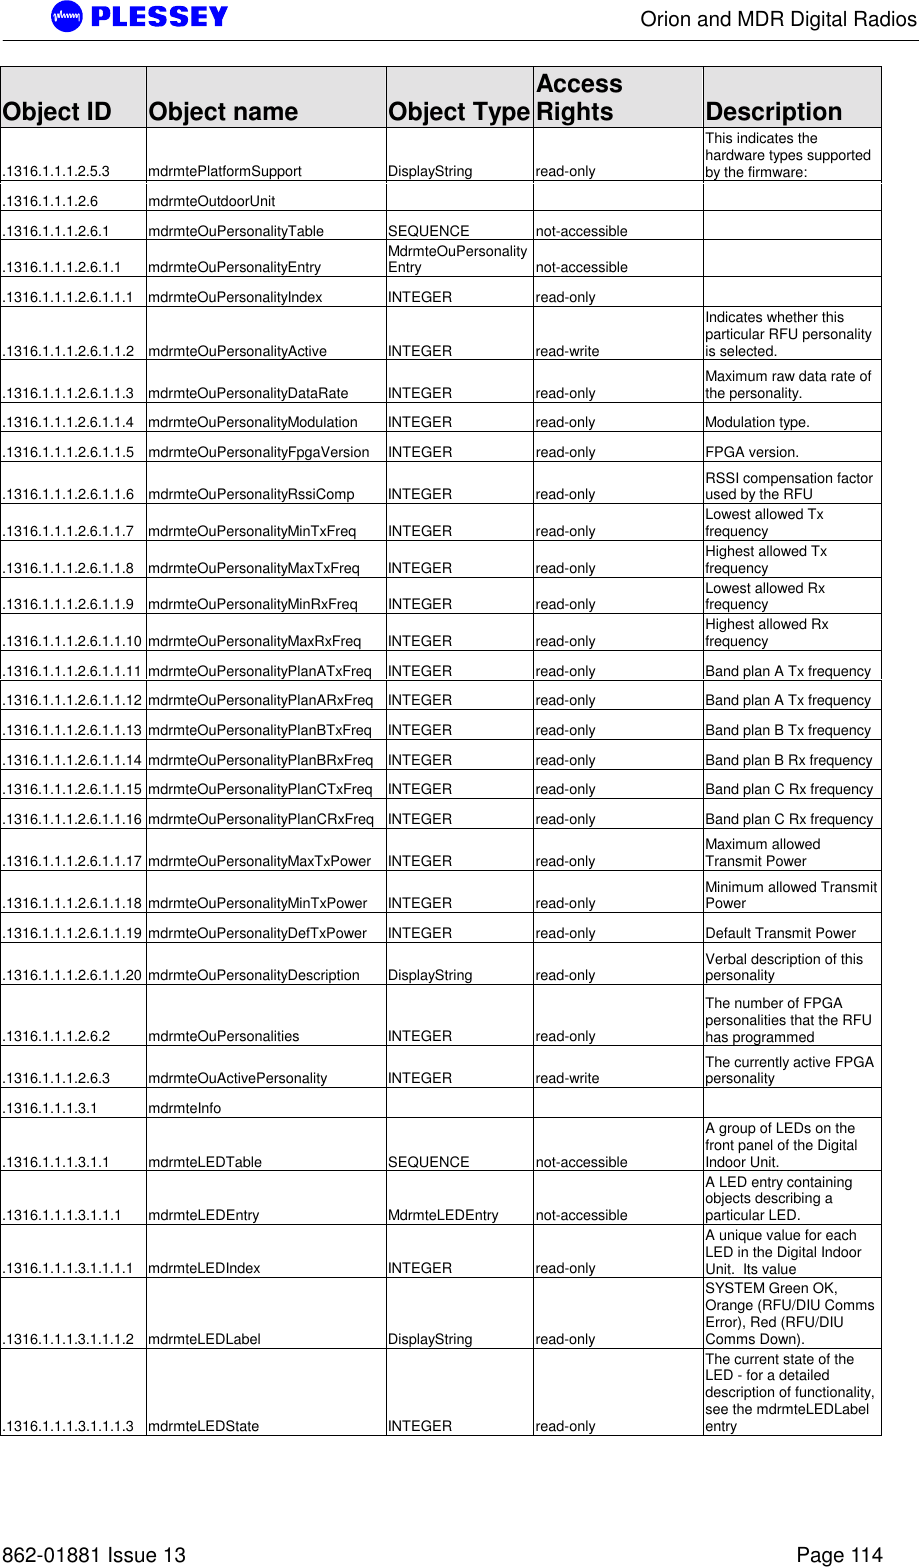      Orion and MDR Digital Radios   862-01881 Issue 13    Page 114 Object ID  Object name  Object Type Access Rights  Description .1316.1.1.1.2.5.3 mdrmtePlatformSupport  DisplayString  read-only This indicates the hardware types supported by the firmware: .1316.1.1.1.2.6 mdrmteOutdoorUnit       .1316.1.1.1.2.6.1 mdrmteOuPersonalityTable  SEQUENCE  not-accessible   .1316.1.1.1.2.6.1.1 mdrmteOuPersonalityEntry  MdrmteOuPersonalityEntry not-accessible  .1316.1.1.1.2.6.1.1.1 mdrmteOuPersonalityIndex  INTEGER  read-only   .1316.1.1.1.2.6.1.1.2 mdrmteOuPersonalityActive  INTEGER  read-write Indicates whether this particular RFU personality is selected. .1316.1.1.1.2.6.1.1.3 mdrmteOuPersonalityDataRate  INTEGER  read-only  Maximum raw data rate of the personality. .1316.1.1.1.2.6.1.1.4 mdrmteOuPersonalityModulation  INTEGER  read-only  Modulation type. .1316.1.1.1.2.6.1.1.5 mdrmteOuPersonalityFpgaVersion  INTEGER  read-only  FPGA version. .1316.1.1.1.2.6.1.1.6 mdrmteOuPersonalityRssiComp  INTEGER  read-only  RSSI compensation factor used by the RFU .1316.1.1.1.2.6.1.1.7 mdrmteOuPersonalityMinTxFreq  INTEGER  read-only  Lowest allowed Tx frequency .1316.1.1.1.2.6.1.1.8 mdrmteOuPersonalityMaxTxFreq  INTEGER  read-only  Highest allowed Tx frequency .1316.1.1.1.2.6.1.1.9 mdrmteOuPersonalityMinRxFreq  INTEGER  read-only  Lowest allowed Rx frequency .1316.1.1.1.2.6.1.1.10 mdrmteOuPersonalityMaxRxFreq  INTEGER  read-only  Highest allowed Rx frequency .1316.1.1.1.2.6.1.1.11  mdrmteOuPersonalityPlanATxFreq  INTEGER  read-only  Band plan A Tx frequency .1316.1.1.1.2.6.1.1.12  mdrmteOuPersonalityPlanARxFreq  INTEGER  read-only  Band plan A Tx frequency .1316.1.1.1.2.6.1.1.13  mdrmteOuPersonalityPlanBTxFreq  INTEGER  read-only  Band plan B Tx frequency .1316.1.1.1.2.6.1.1.14  mdrmteOuPersonalityPlanBRxFreq  INTEGER  read-only  Band plan B Rx frequency .1316.1.1.1.2.6.1.1.15  mdrmteOuPersonalityPlanCTxFreq  INTEGER  read-only  Band plan C Rx frequency .1316.1.1.1.2.6.1.1.16  mdrmteOuPersonalityPlanCRxFreq  INTEGER  read-only  Band plan C Rx frequency .1316.1.1.1.2.6.1.1.17 mdrmteOuPersonalityMaxTxPower  INTEGER  read-only  Maximum allowed Transmit Power .1316.1.1.1.2.6.1.1.18 mdrmteOuPersonalityMinTxPower  INTEGER  read-only  Minimum allowed Transmit Power .1316.1.1.1.2.6.1.1.19  mdrmteOuPersonalityDefTxPower  INTEGER  read-only  Default Transmit Power .1316.1.1.1.2.6.1.1.20 mdrmteOuPersonalityDescription  DisplayString  read-only  Verbal description of this personality .1316.1.1.1.2.6.2 mdrmteOuPersonalities  INTEGER  read-only The number of FPGA personalities that the RFU has programmed .1316.1.1.1.2.6.3 mdrmteOuActivePersonality  INTEGER  read-write  The currently active FPGA personality .1316.1.1.1.3.1 mdrmteInfo       .1316.1.1.1.3.1.1 mdrmteLEDTable  SEQUENCE  not-accessible A group of LEDs on the front panel of the Digital Indoor Unit. .1316.1.1.1.3.1.1.1 mdrmteLEDEntry  MdrmteLEDEntry  not-accessible A LED entry containing objects describing a particular LED. .1316.1.1.1.3.1.1.1.1 mdrmteLEDIndex  INTEGER  read-only A unique value for each LED in the Digital Indoor Unit.  Its value .1316.1.1.1.3.1.1.1.2 mdrmteLEDLabel  DisplayString  read-only SYSTEM Green OK, Orange (RFU/DIU Comms Error), Red (RFU/DIU Comms Down).   .1316.1.1.1.3.1.1.1.3 mdrmteLEDState  INTEGER  read-only The current state of the LED - for a detailed description of functionality, see the mdrmteLEDLabel entry  